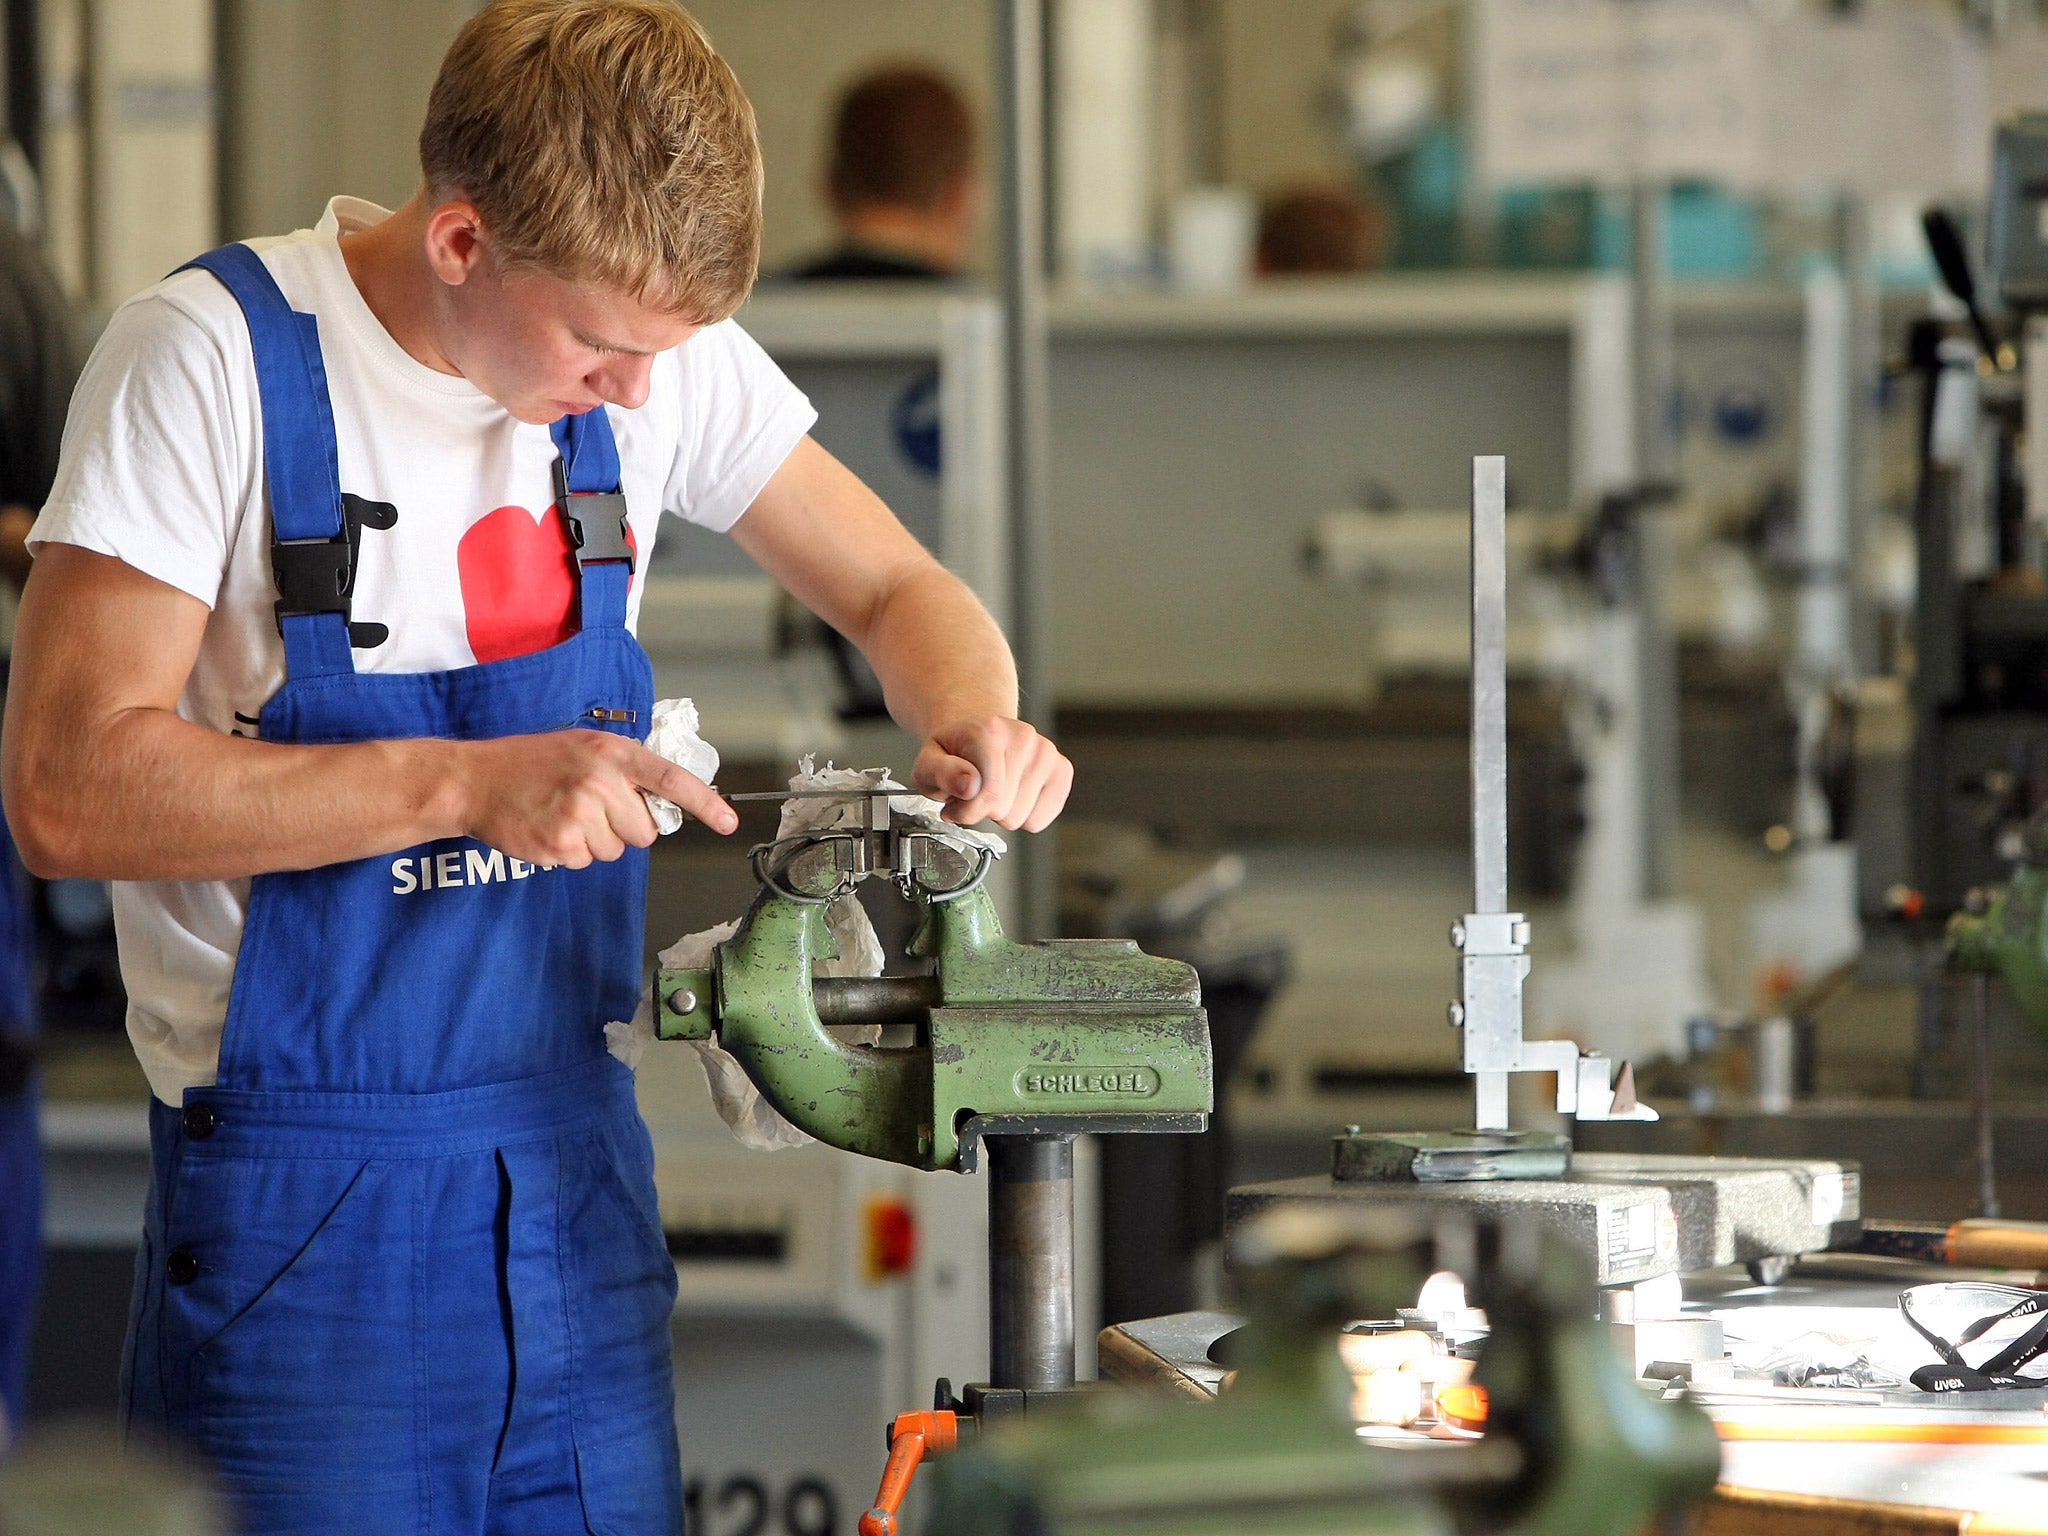 Labour will aim to create at least 80,000 extra apprenticeships a year by 2020